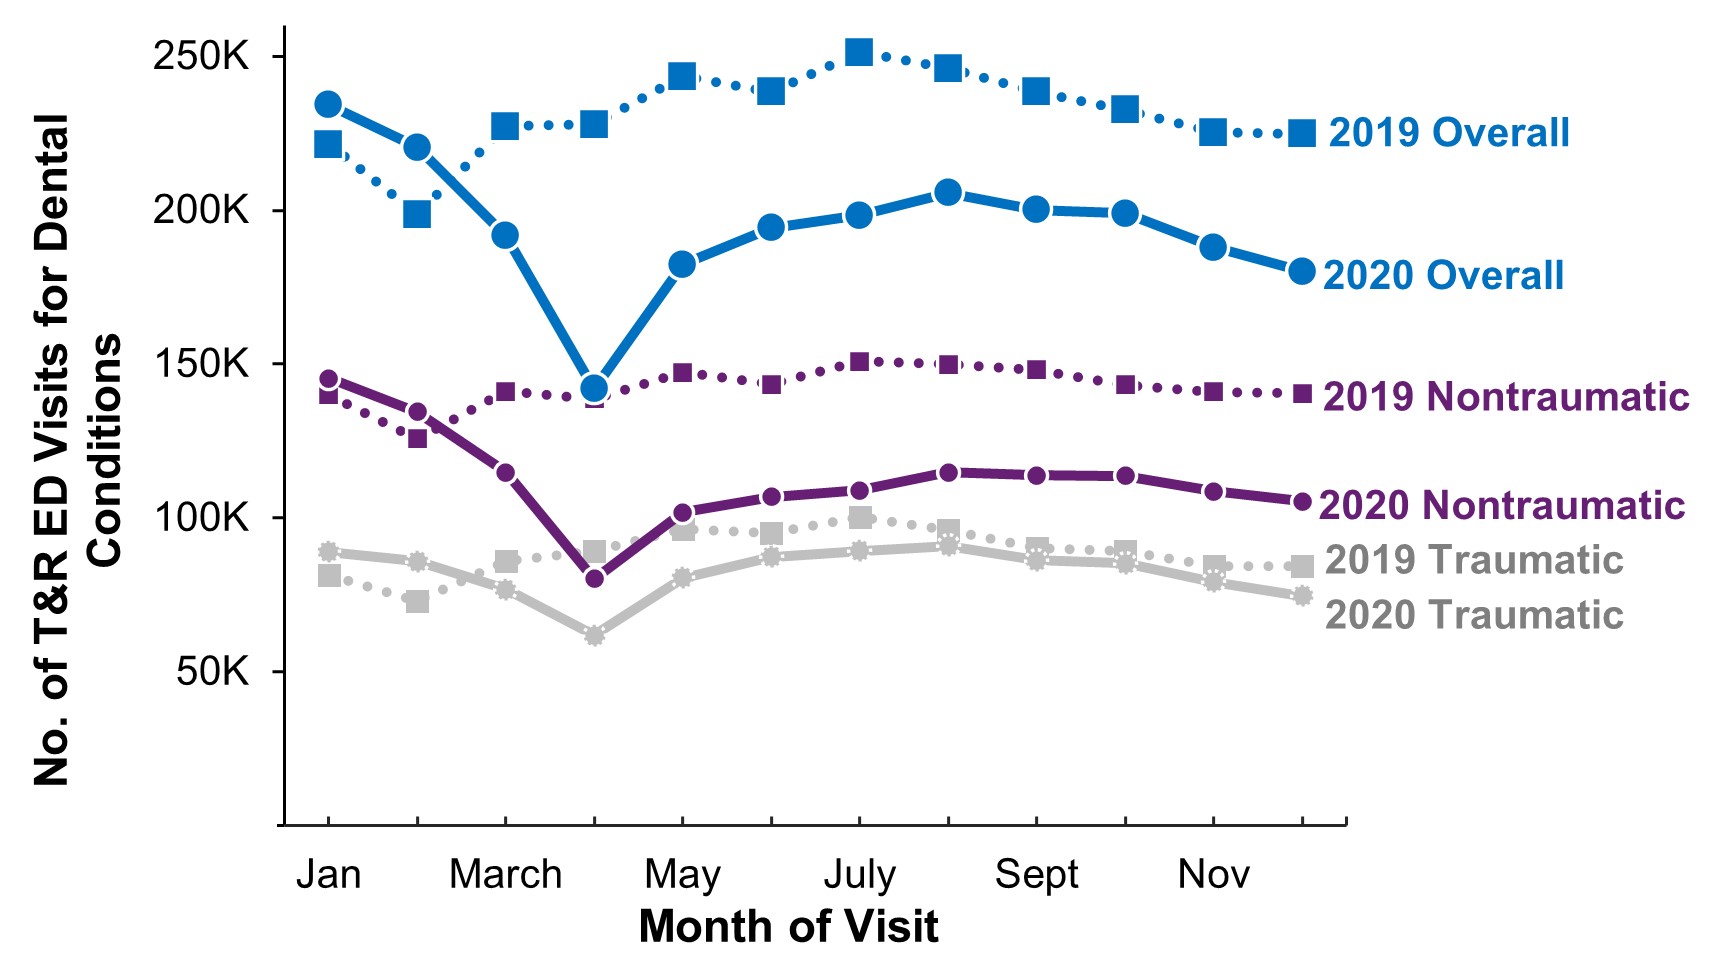 Number of treat-and-release ED visits for dental conditions by month and traumatic vs. nontraumatic conditions, 2019 and 2020